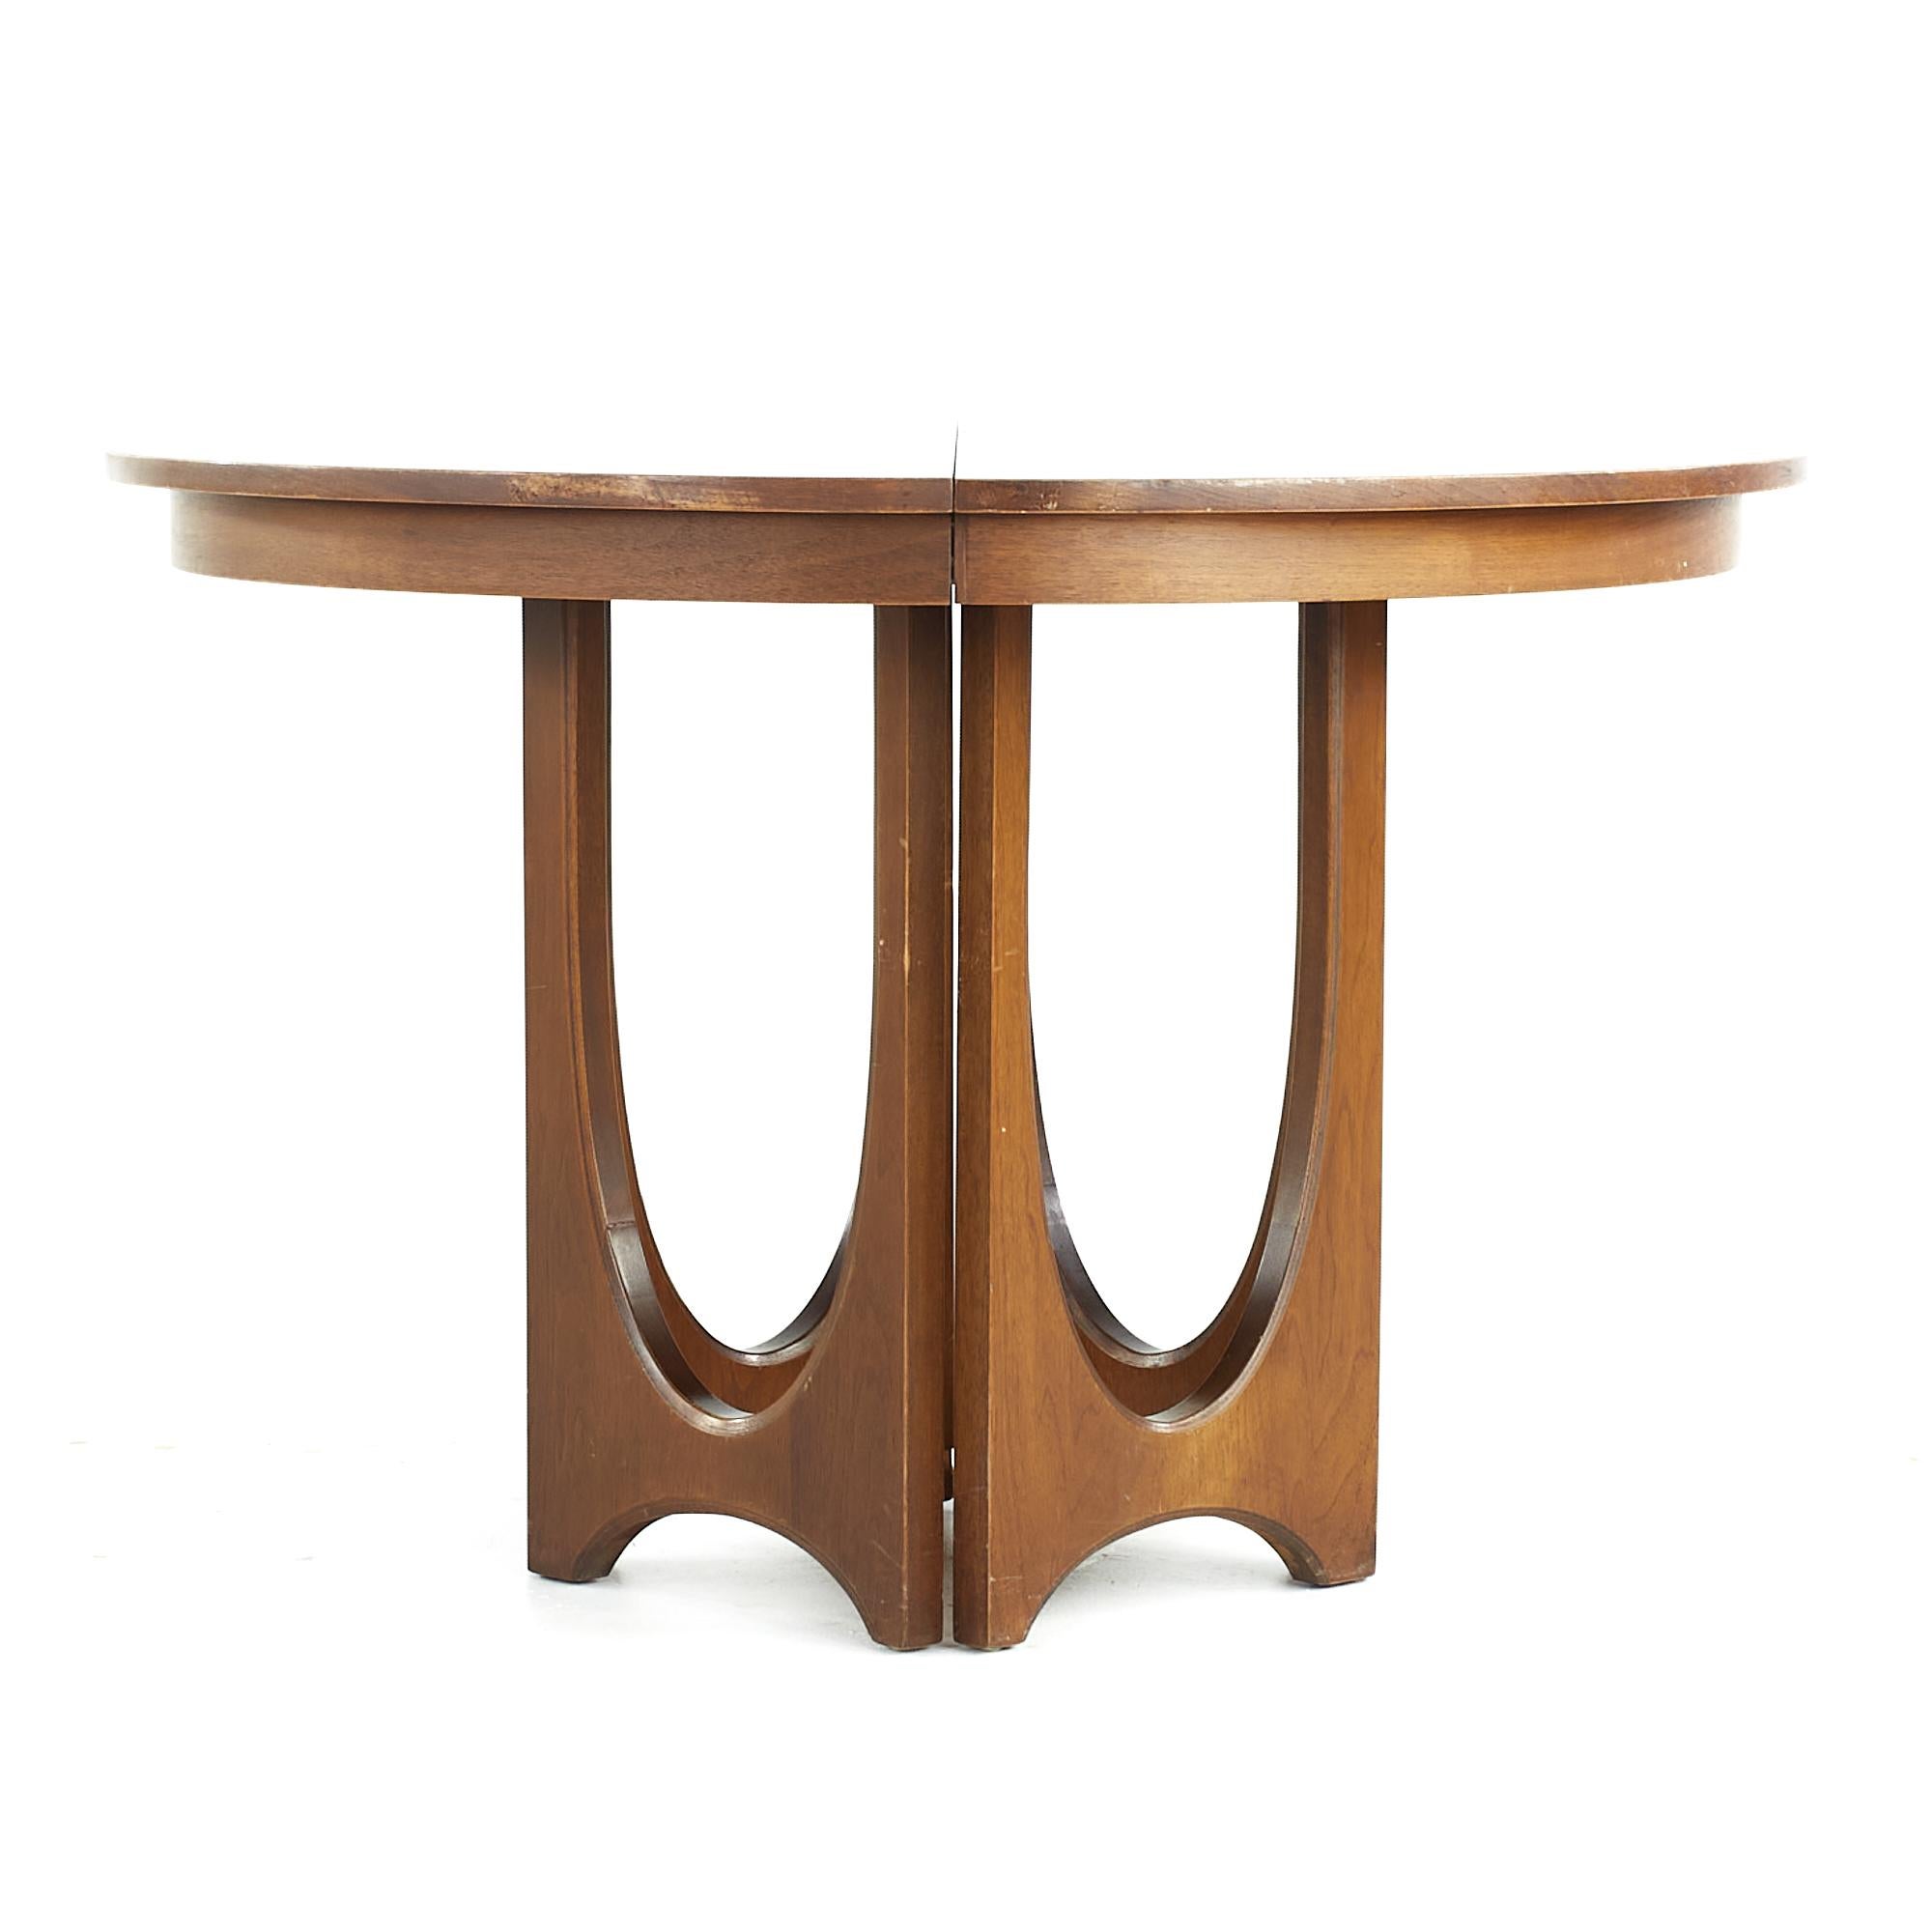 Broyhill Brasilia midcentury Walnut pedestal table with 3 leaves

This table measures: 44.25 wide x 44 deep x 29.75 high, each leaf measures 12 inches wide, making a maximum table width of 80.25 inches when all leaves are used

All pieces of